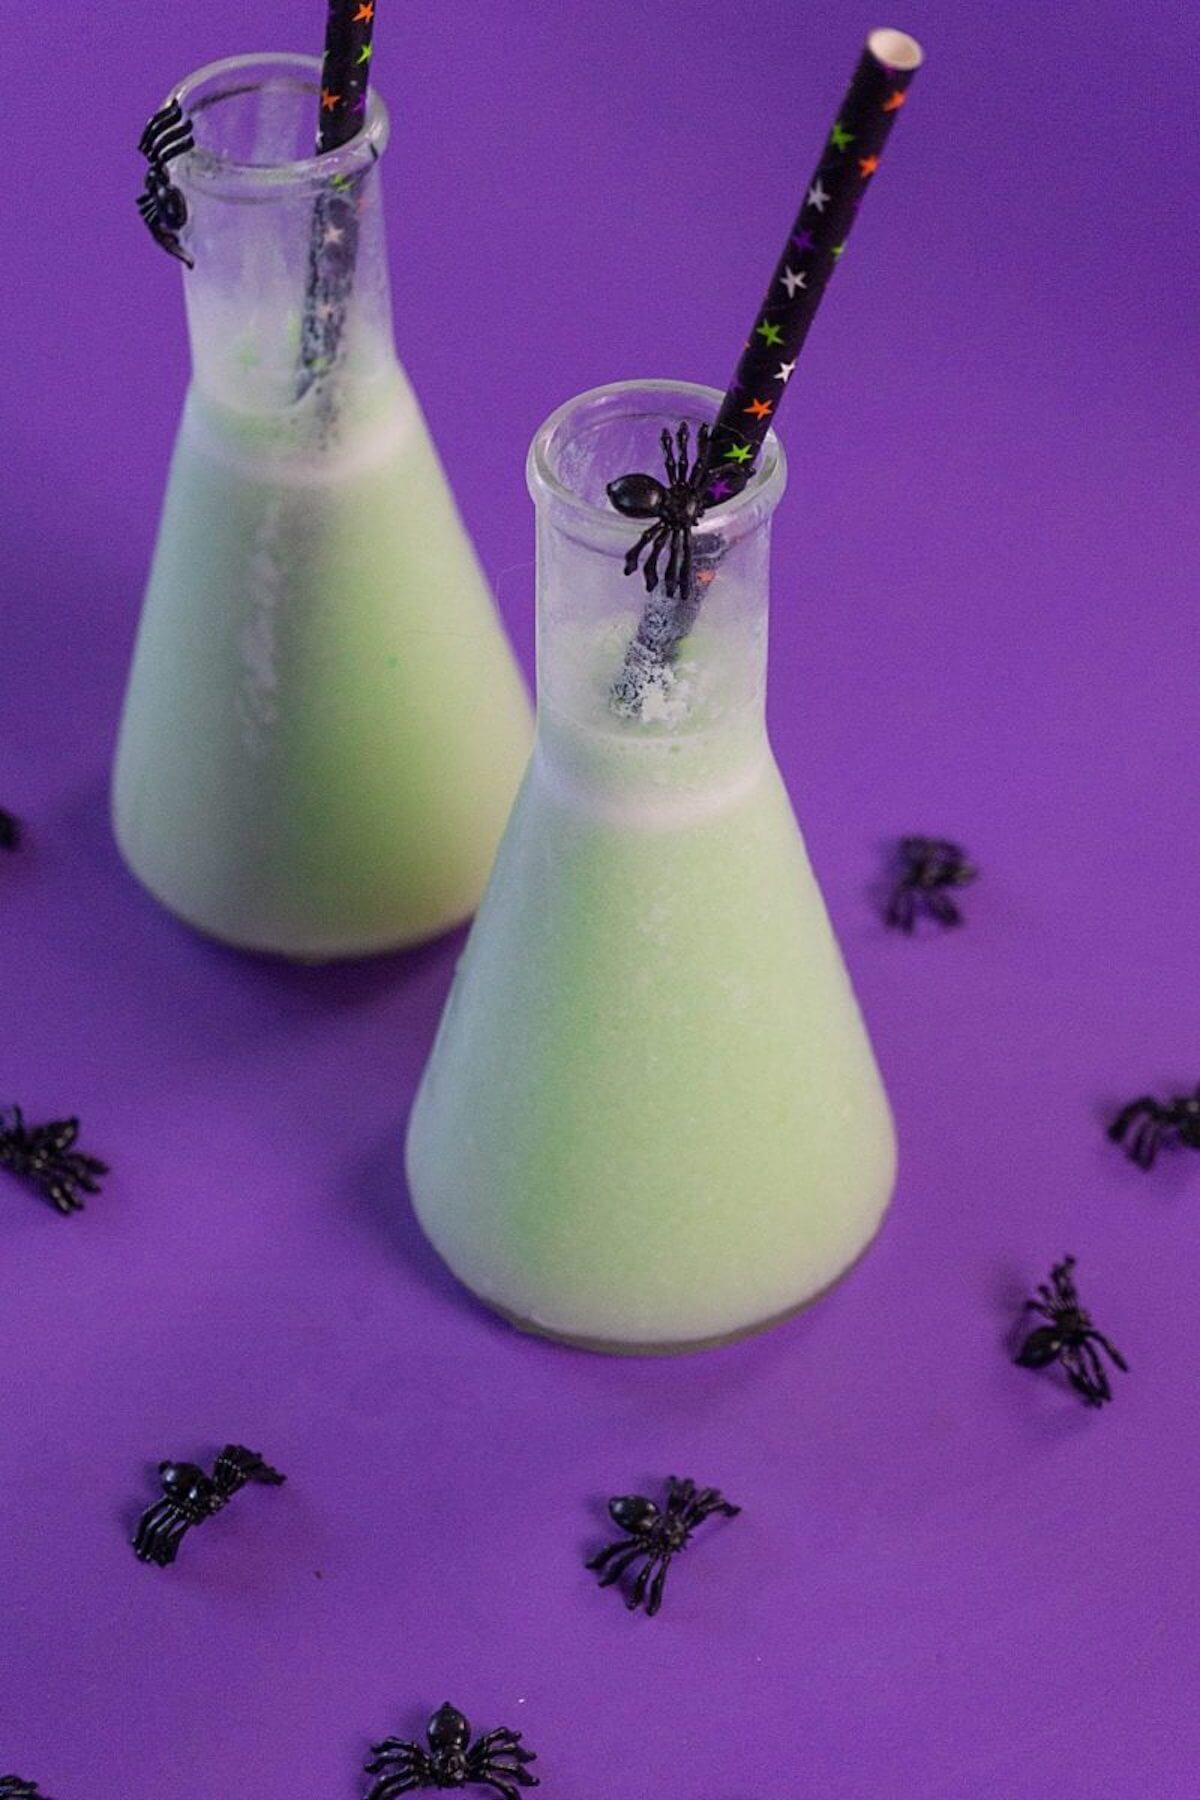 Halloween cocktails in beaker glass surrounded by plastic spiders.